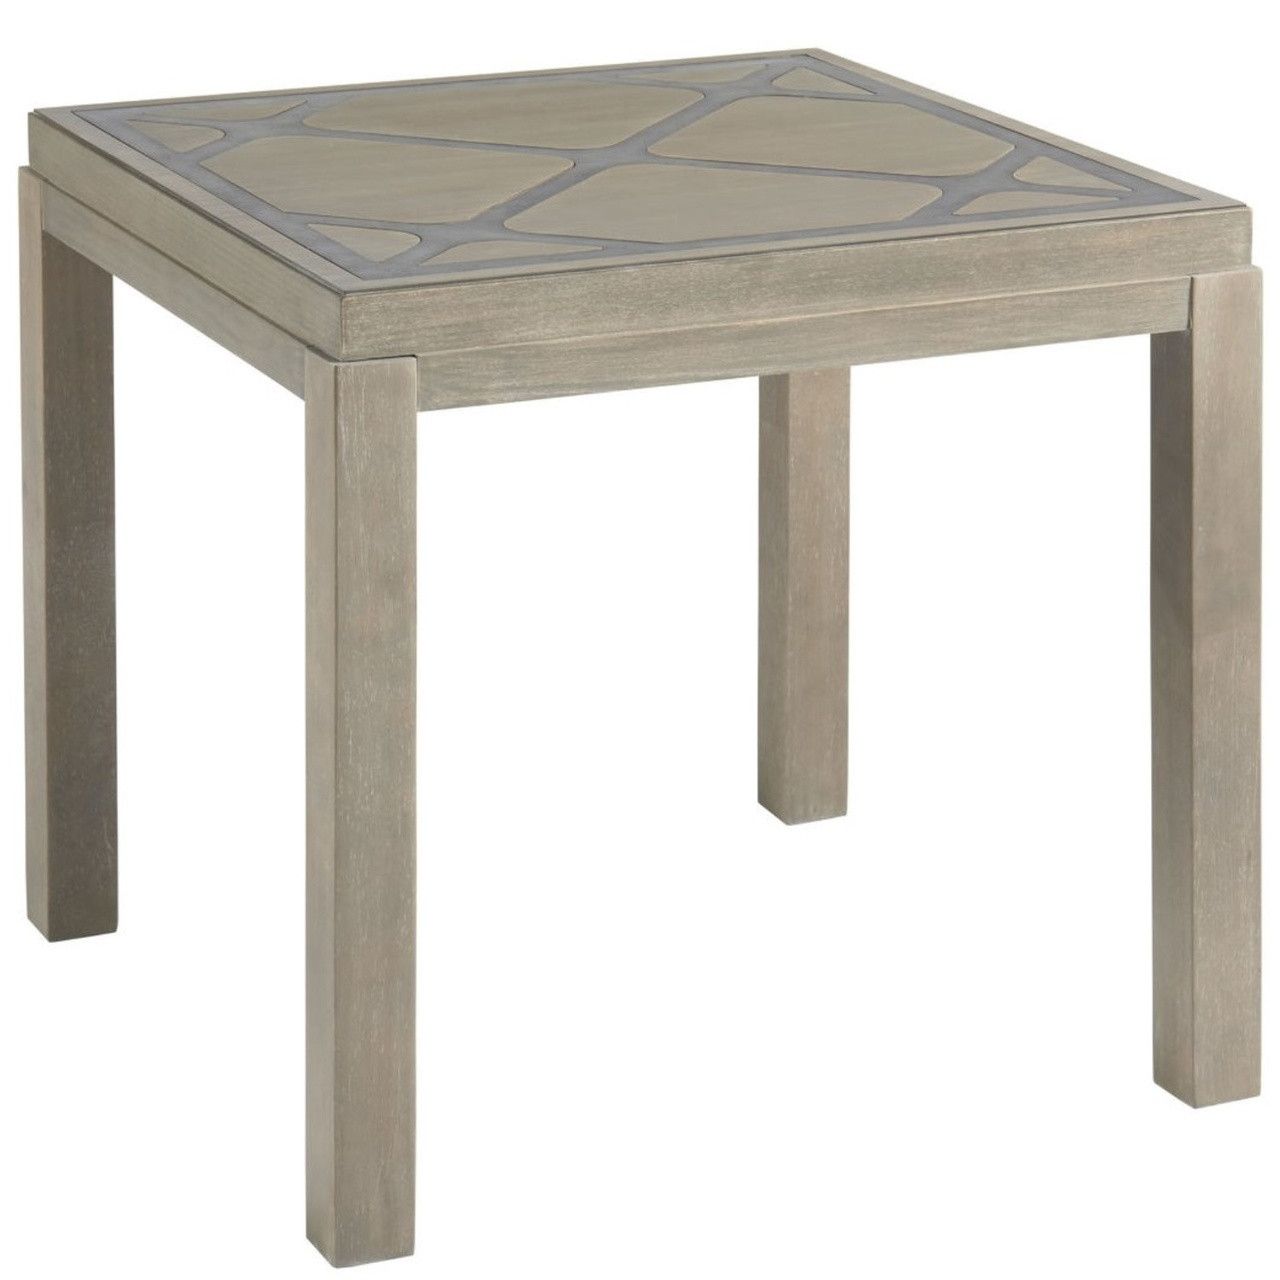 Griffin Rustic Grey Square End Table | Zin Home Inside Rustic Gray End Tables (View 10 of 20)